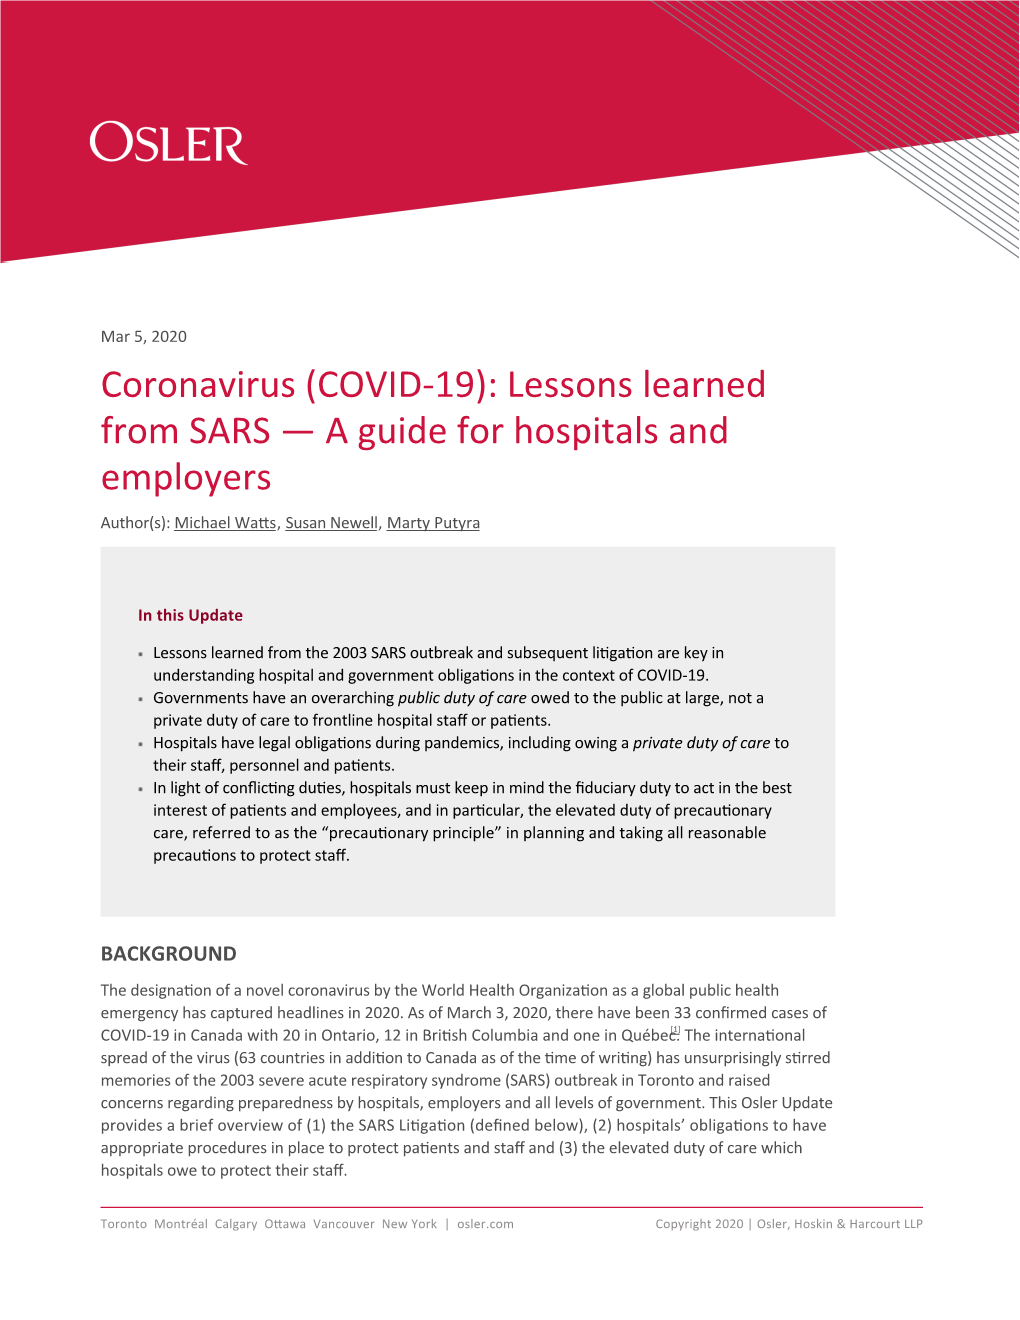 Coronavirus (COVID‐19): Lessons Learned from SARS — a Guide for Hospitals and Employers Author(S): Michael Wa S, Susan Newell, Marty Putyra